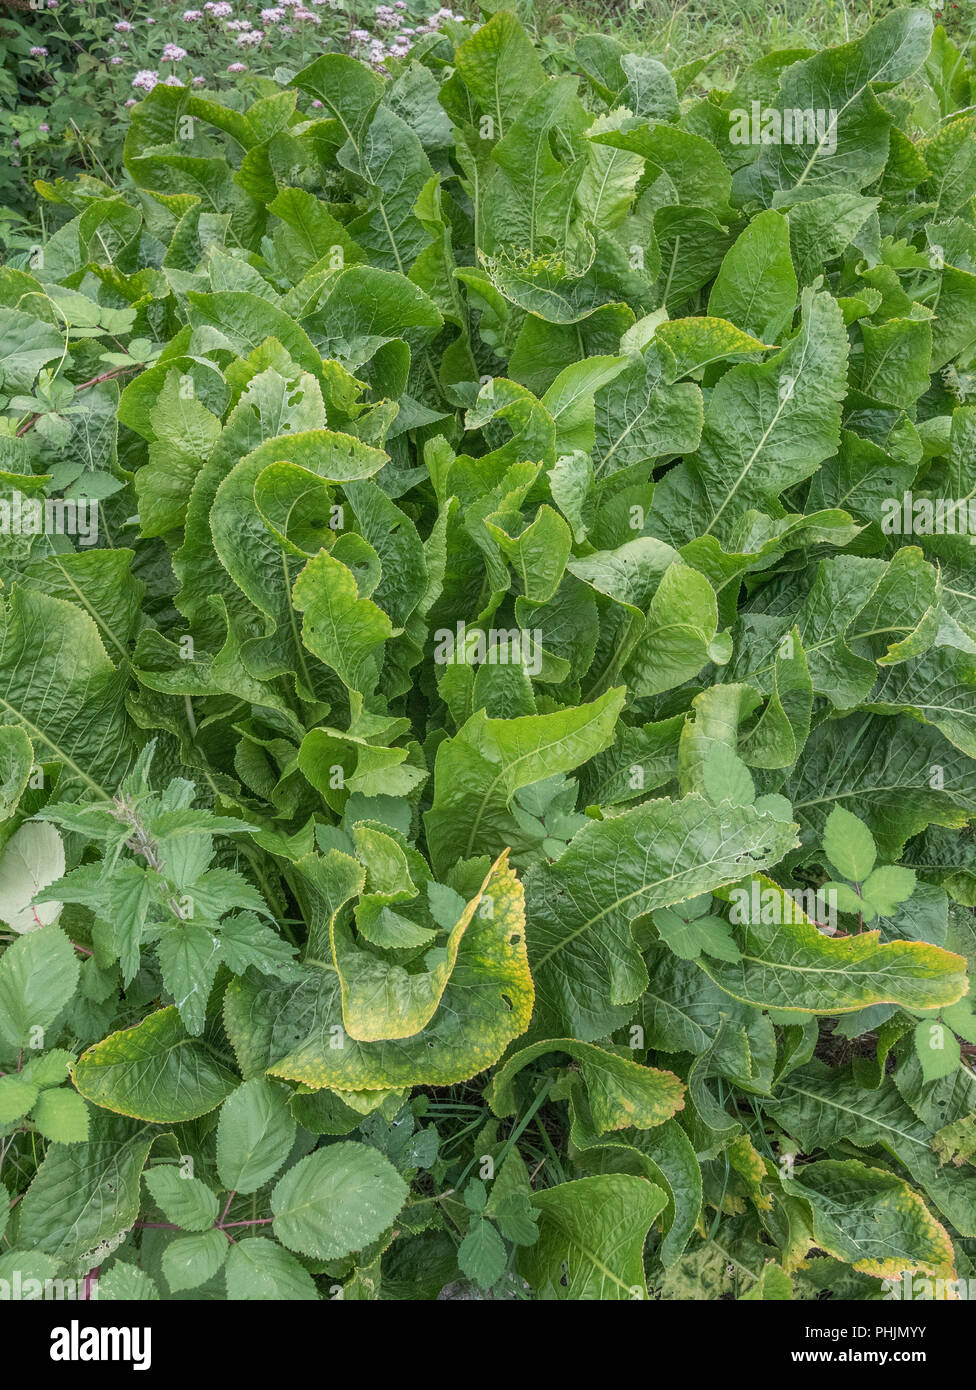 Large green leaves of a cluster of Horseradish / Armoracia rusticana plants growing. A medicinal plant, Horseradish was once used in herbal remedies Stock Photo